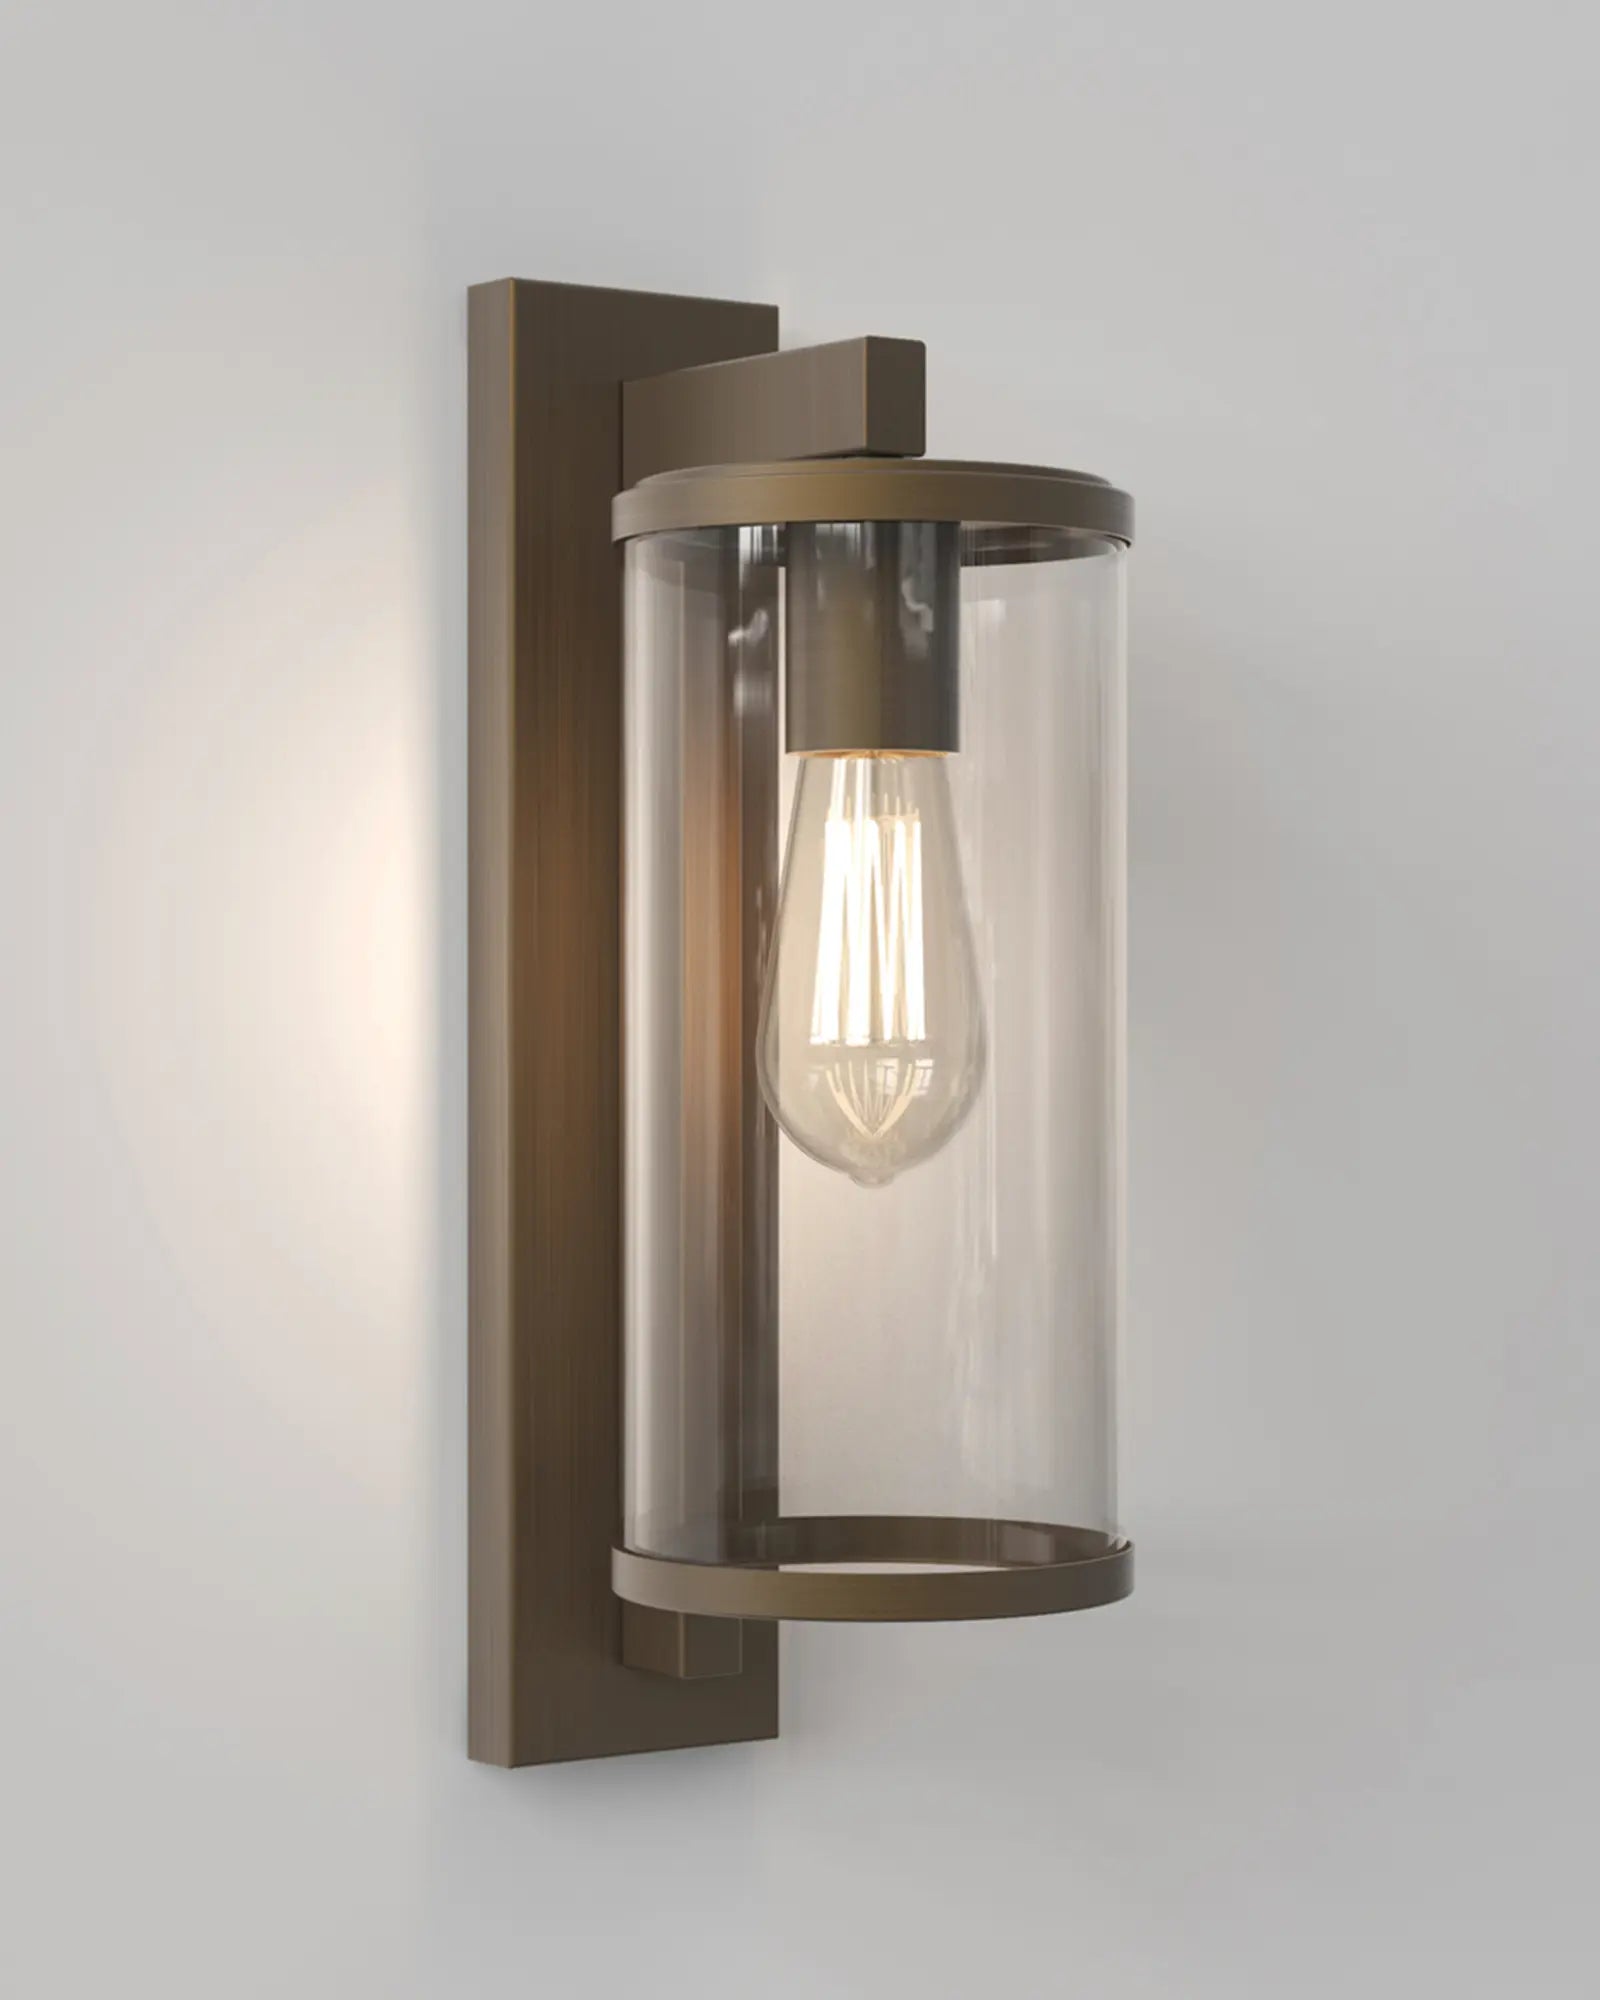 Pimlico Outdoor lantern style metal and glass wall light bronze 400